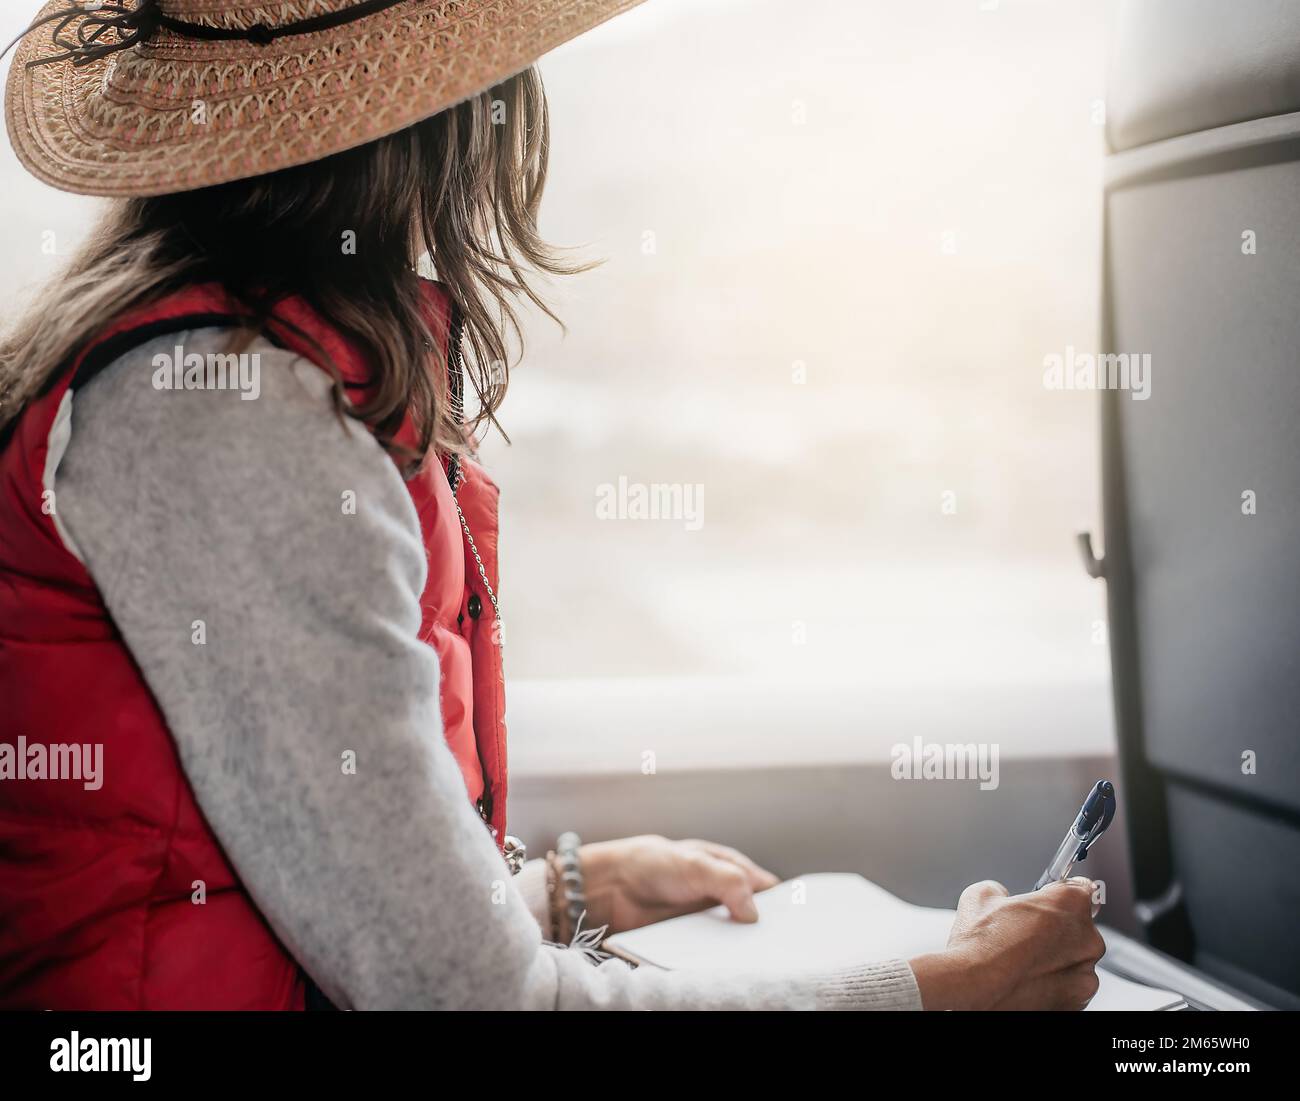 a woman in a hat sitting on a train while looking out the window and writing in a diary. Concept work and making the most of the time on a train Stock Photo